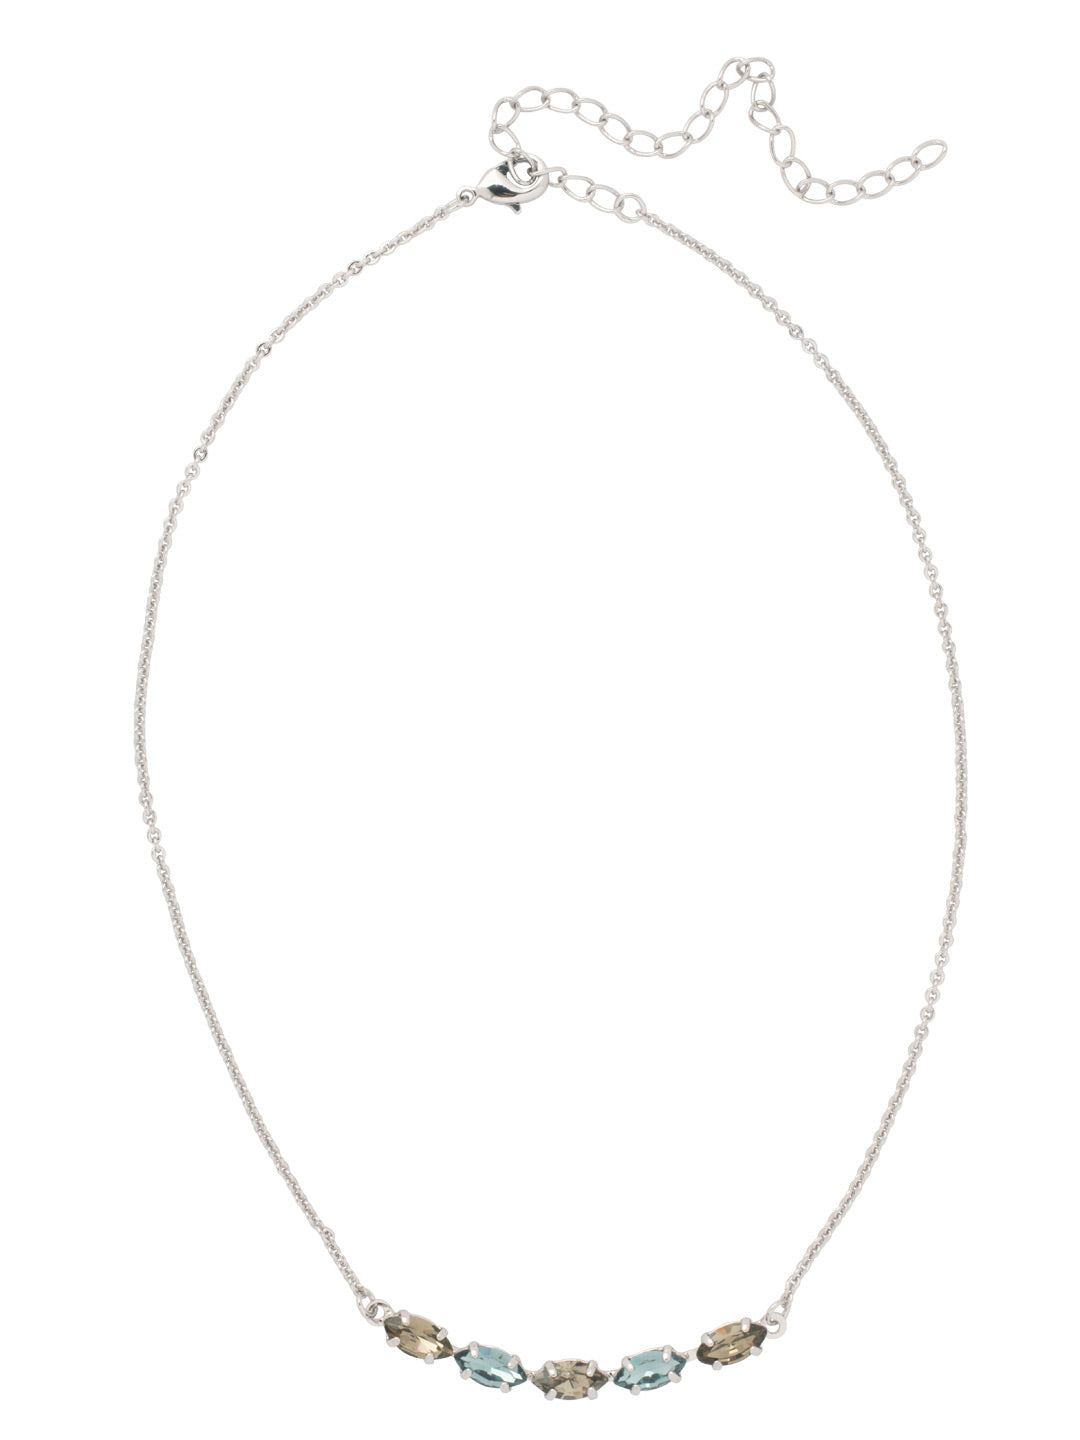 Clarissa Repeating Tennis Necklace - NFL5PDASP - <p>The Clarissa Repeating Tennis Necklace features a row of navette cut crystals on an adjustable chain, secured with a lobster claw clasp. From Sorrelli's Aspen SKY collection in our Palladium finish.</p>